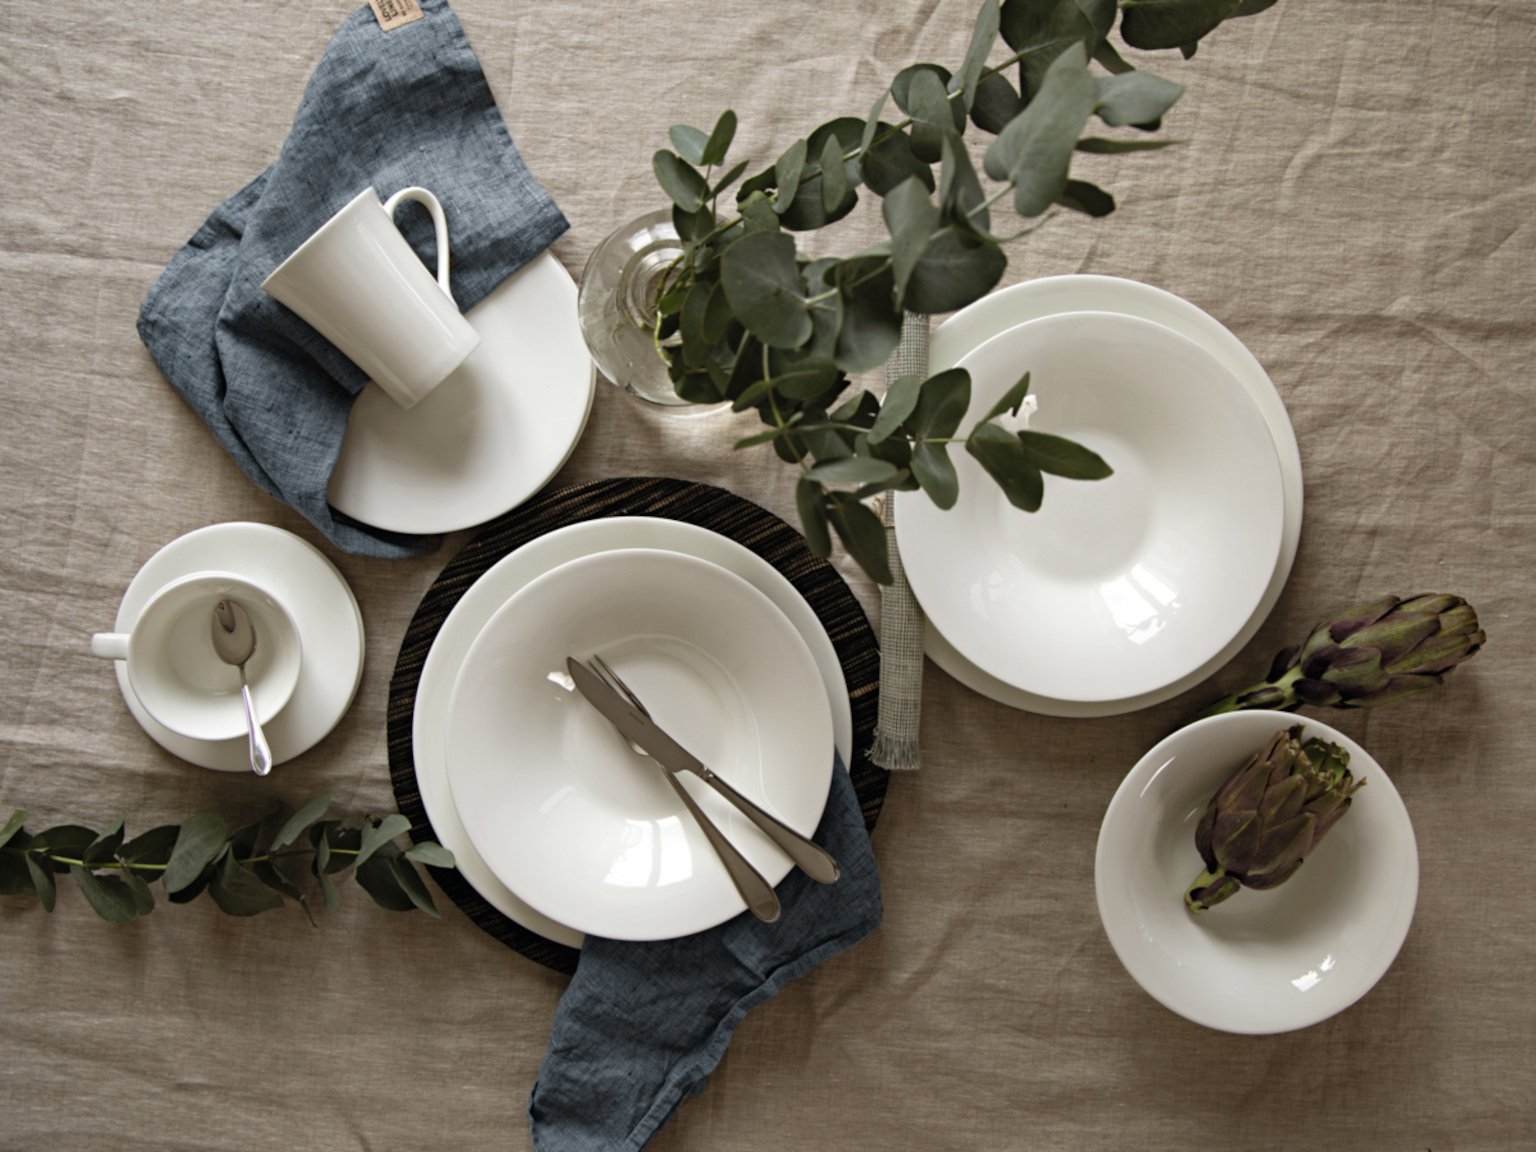 Hutschenreuther Nora White dining collection arranged on linen tablecloth and eucalyptus branches